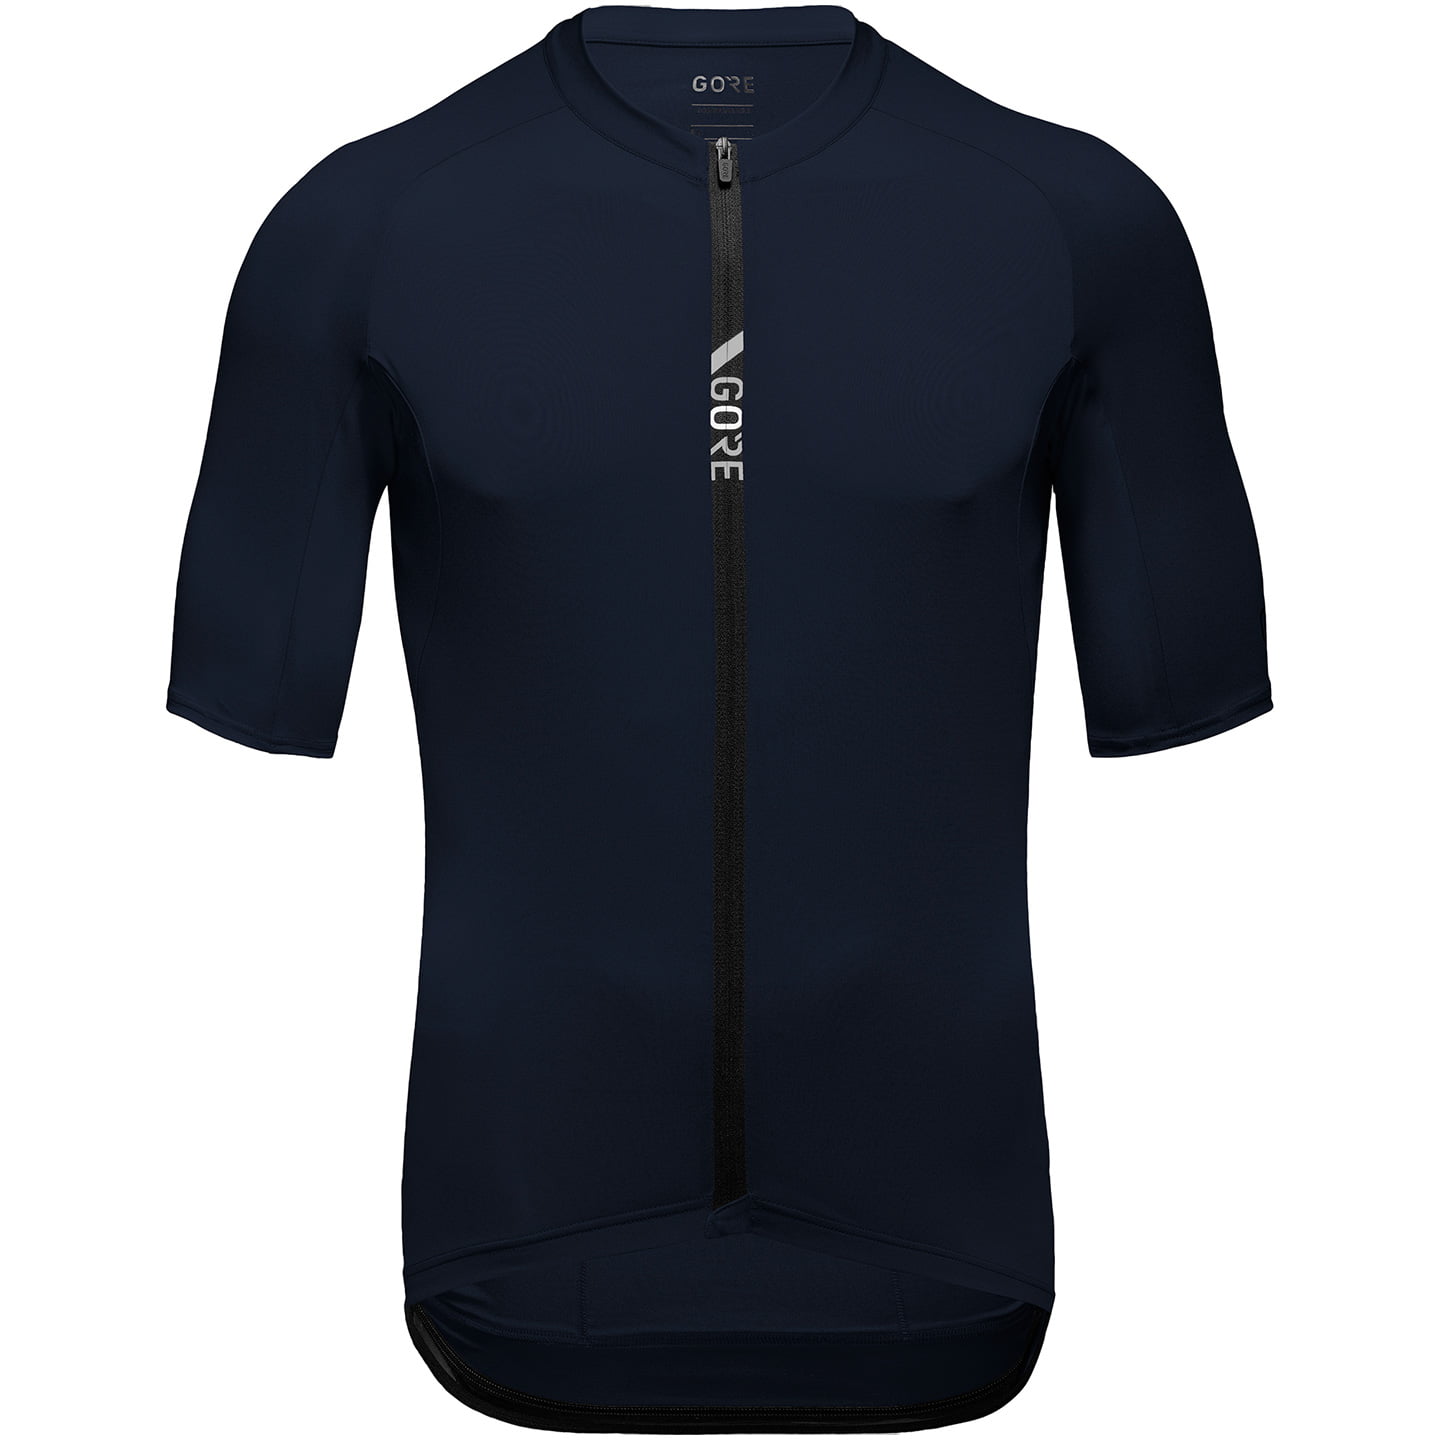 GORE WEAR Torrent Short Sleeve Jersey Short Sleeve Jersey, for men, size 2XL, Cycling jersey, Cycle clothing